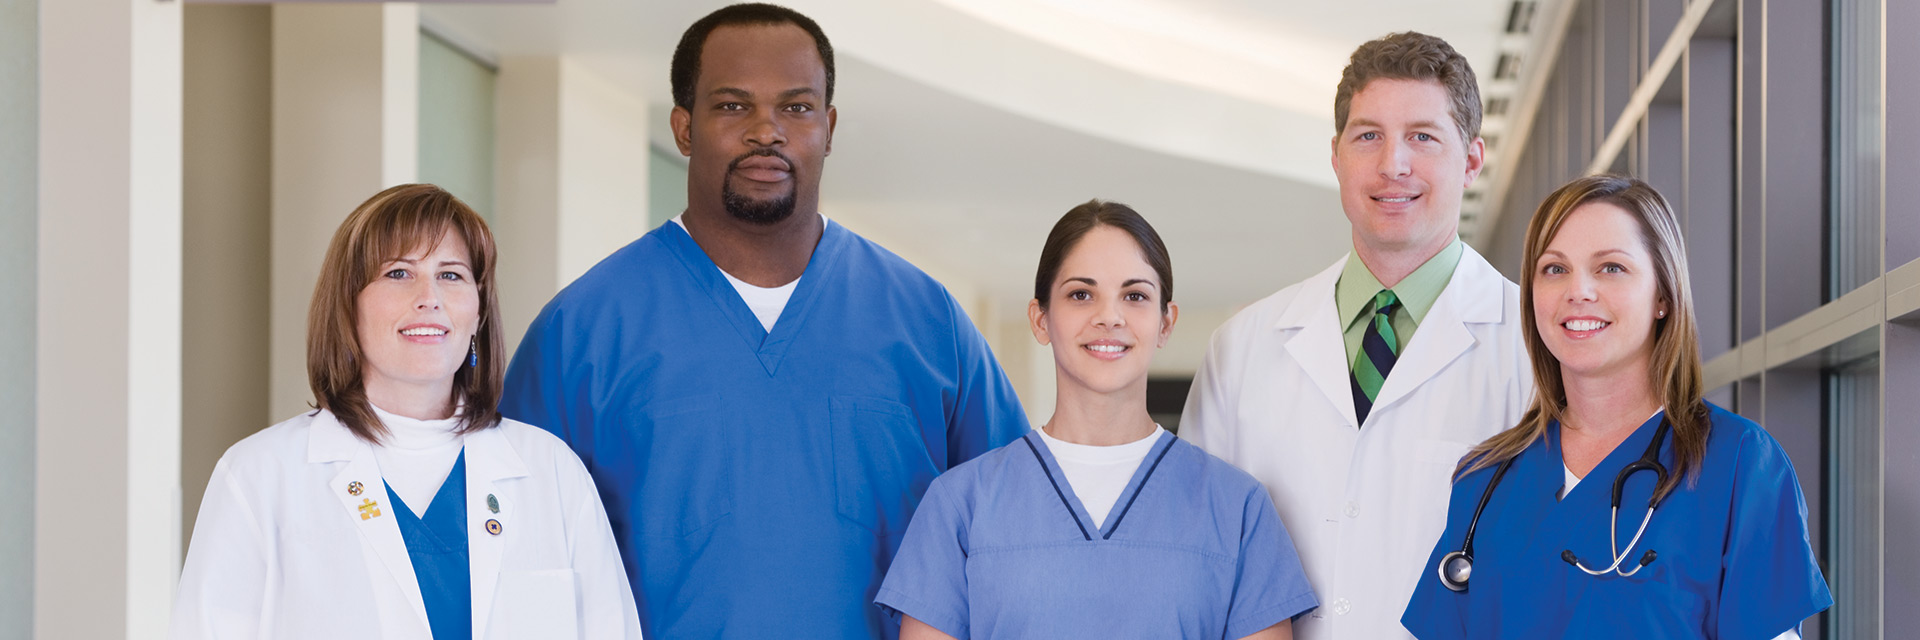 Group of Medical Professionals